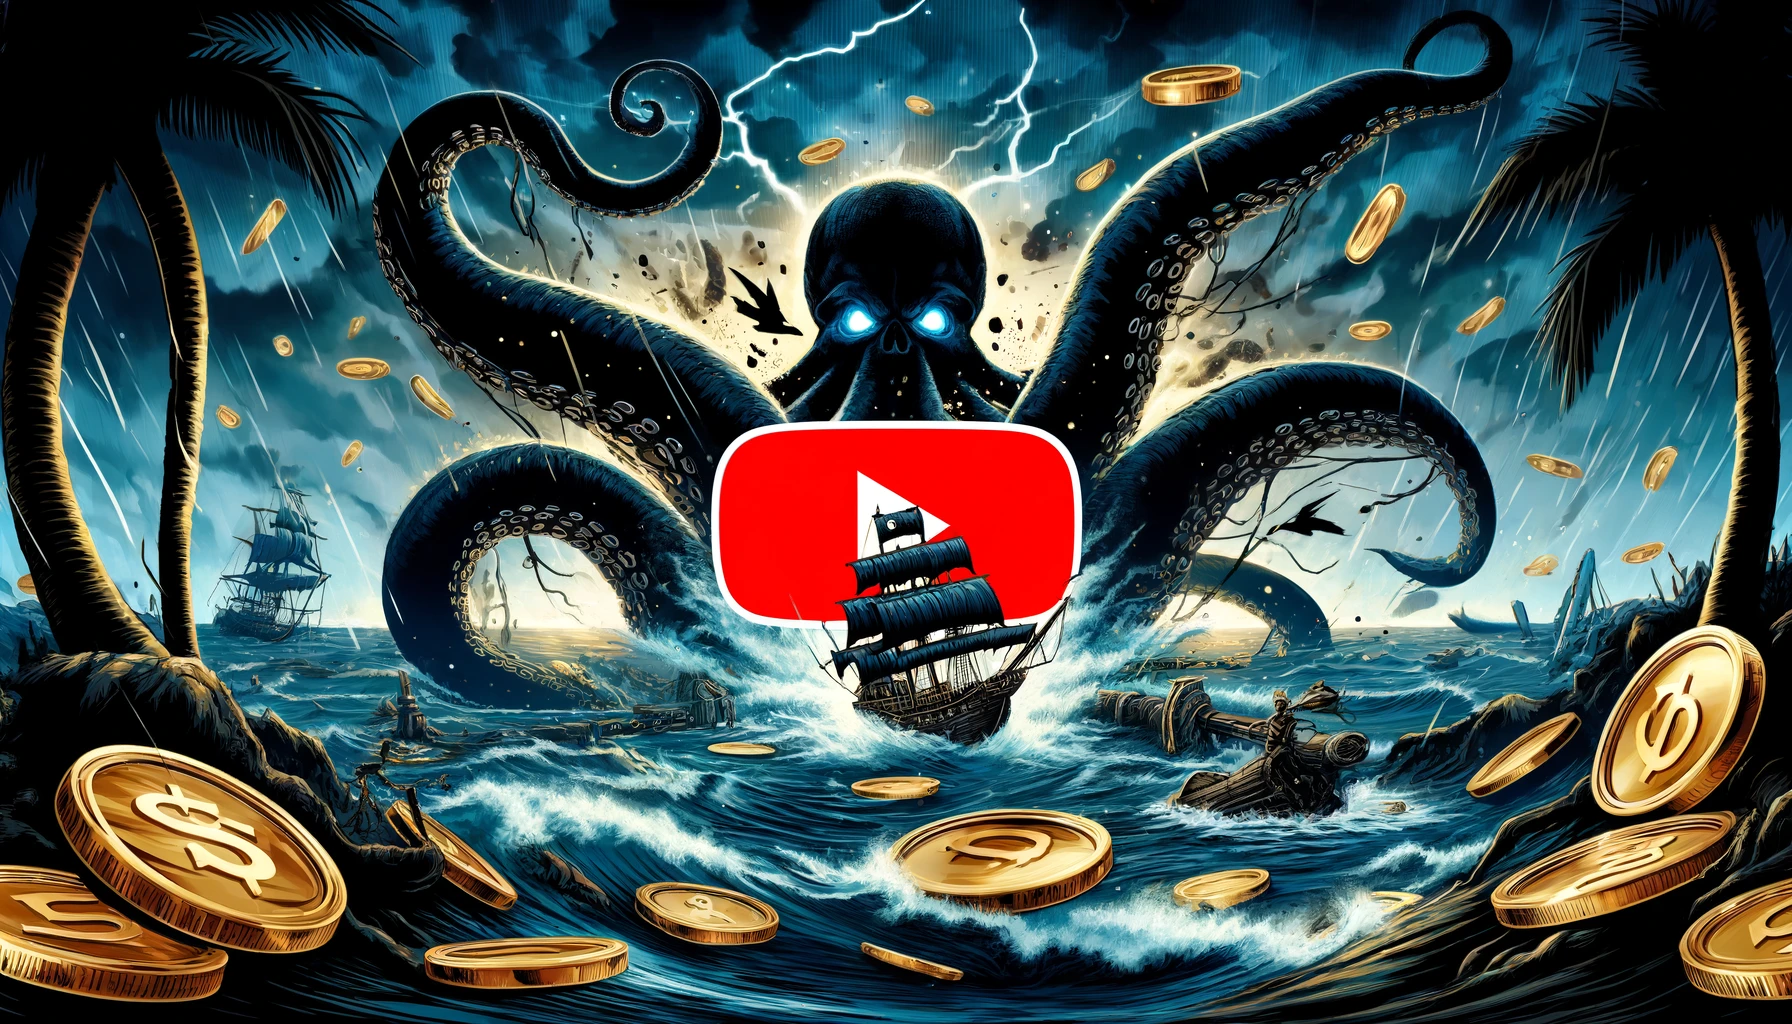 DALL·E 2024-04-20 18.40.27 - A dynamic YouTube thumbnail featuring a kraken and pirate-themed elements. The kraken's tentacles emerge from the ocean with a pirate ship in the back